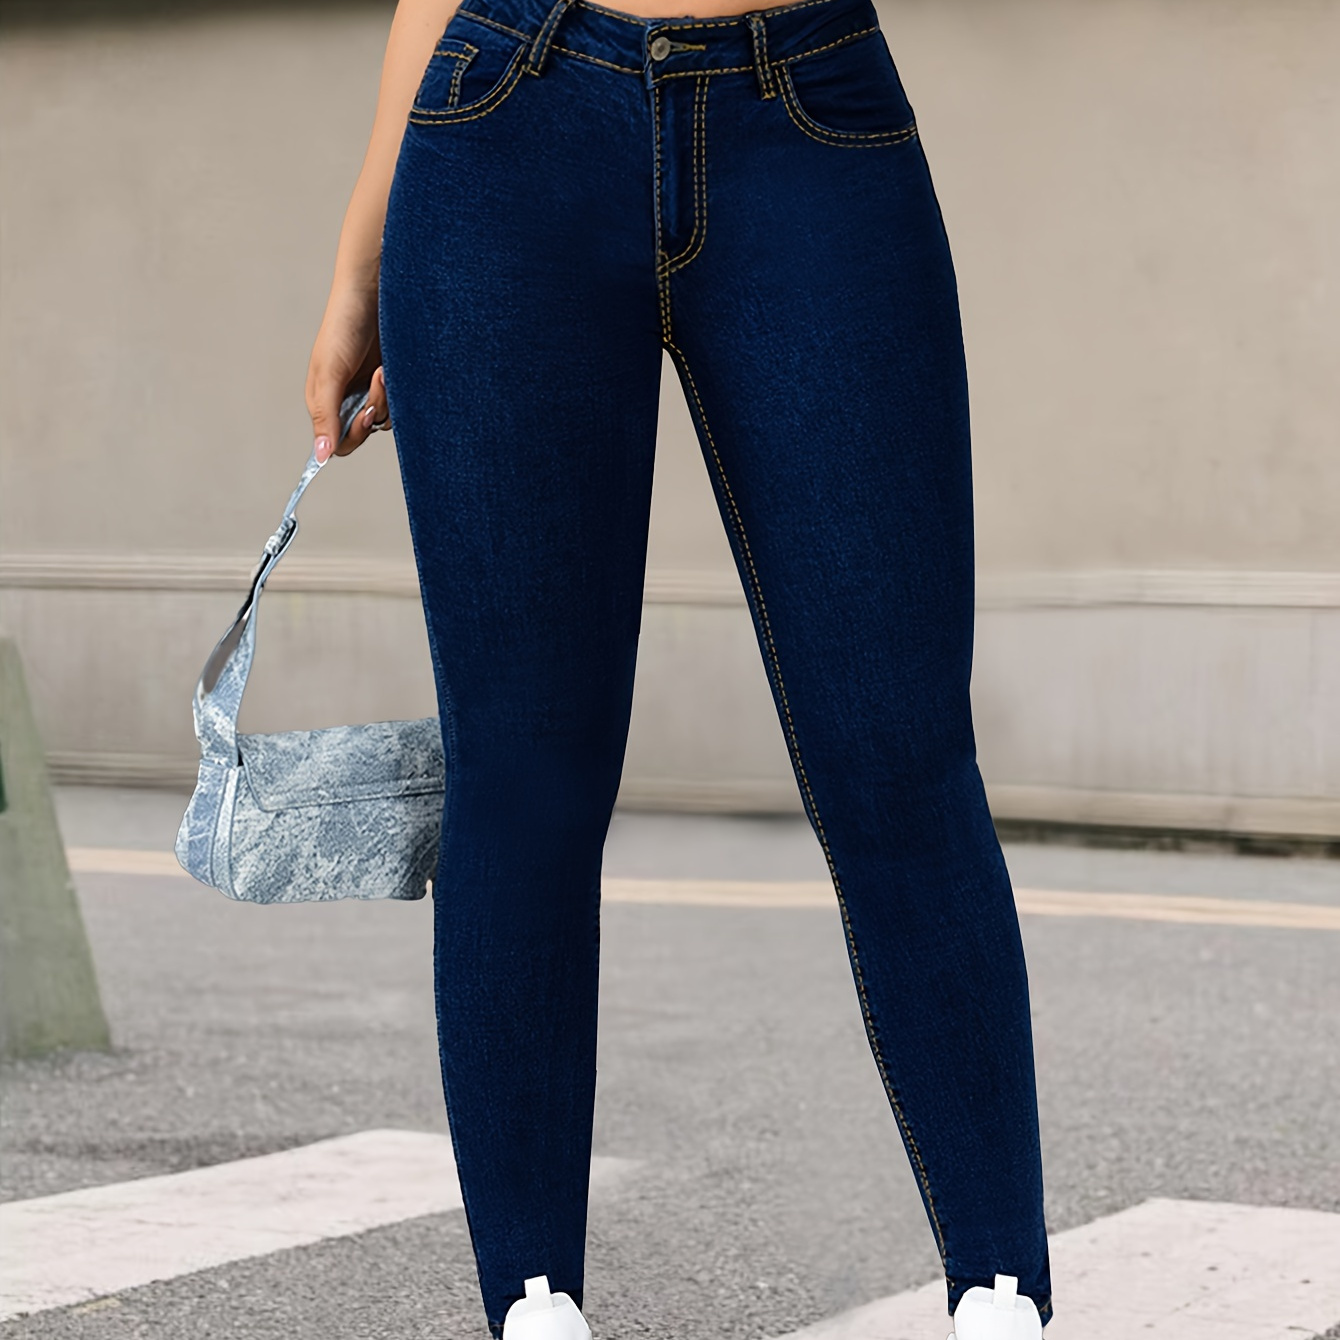 

High-waisted Skinny Jeans For Women, Stretchy Slim-fit Denim Pants, Deep Blue, Street Style Fashion, Versatile Casual Bottoms